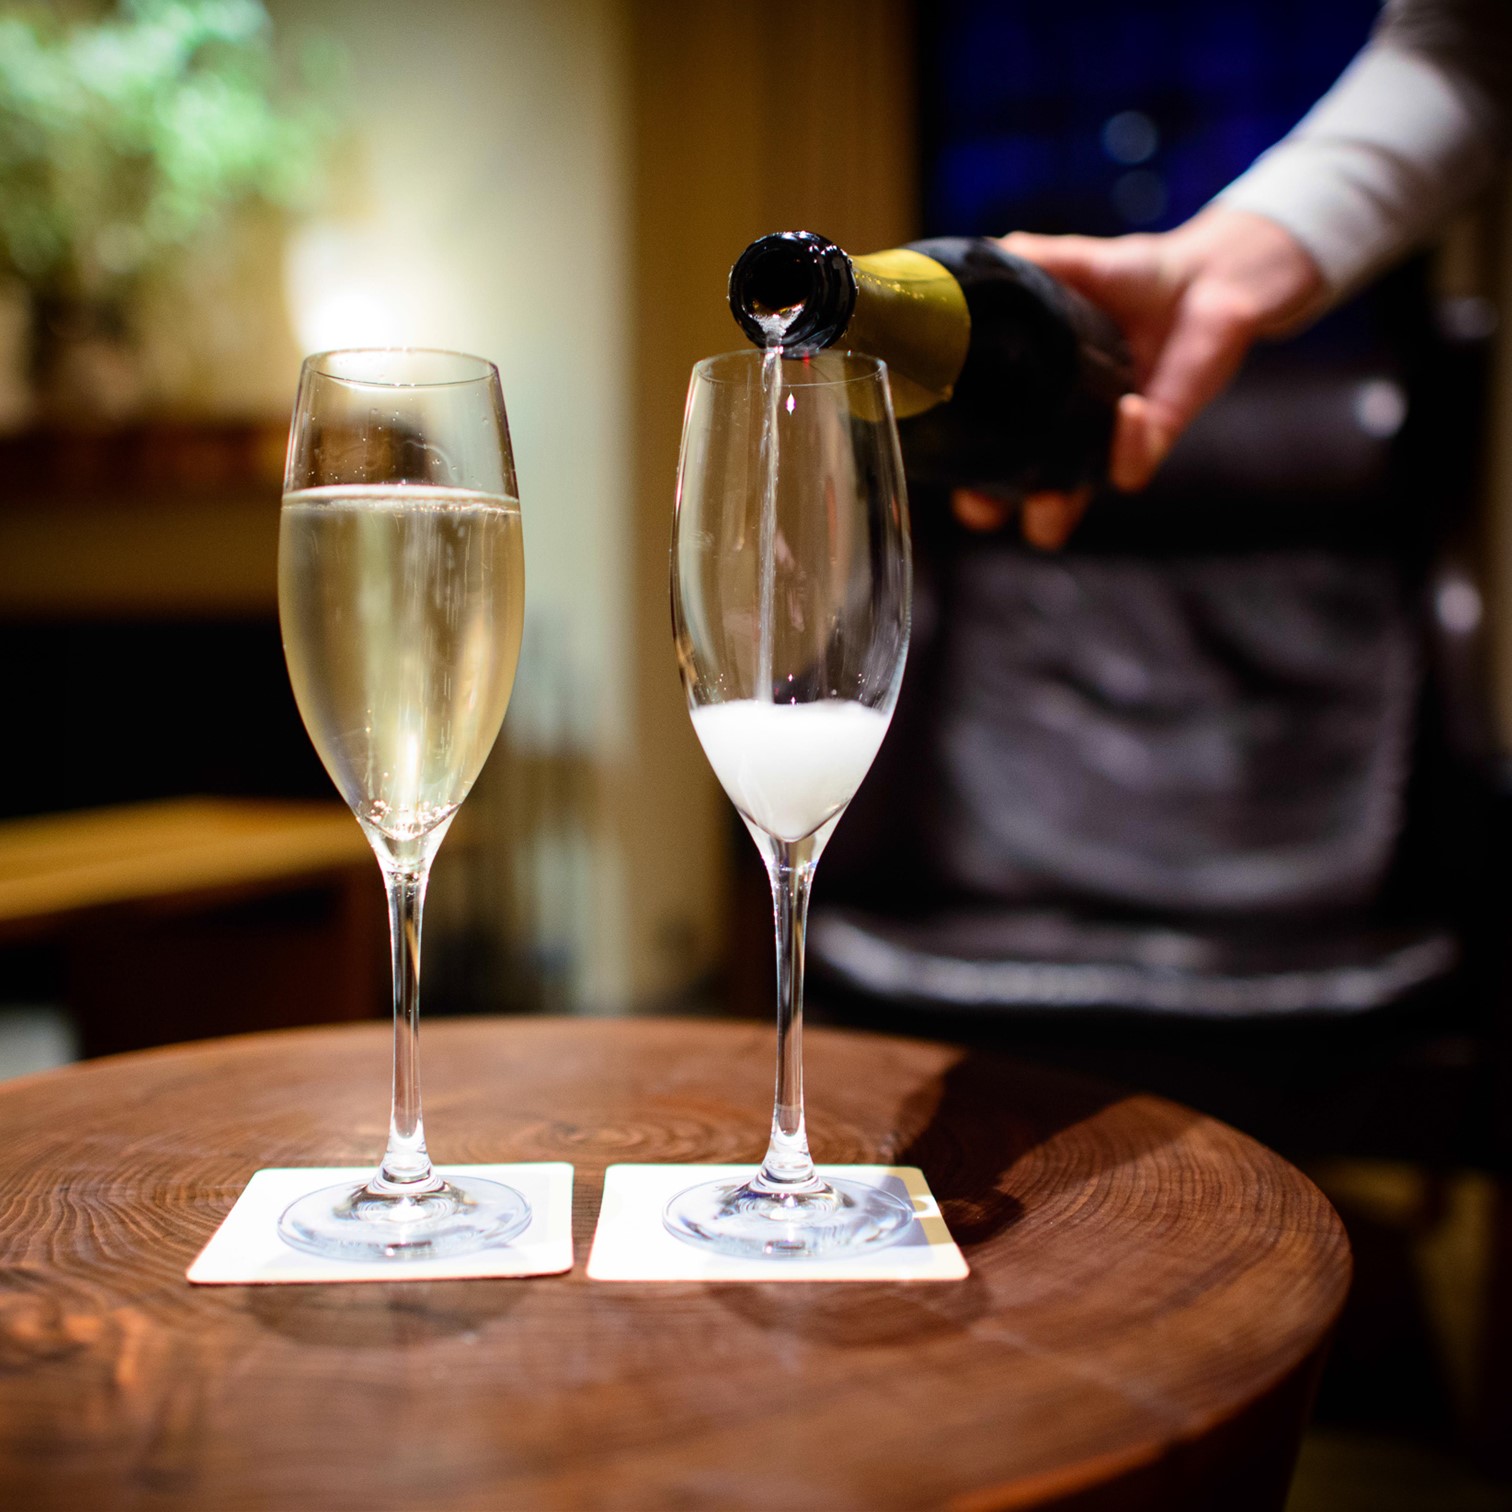 Sparkling  - Shifts in consumer attitudes fuel the growth of sparkling wine in the US